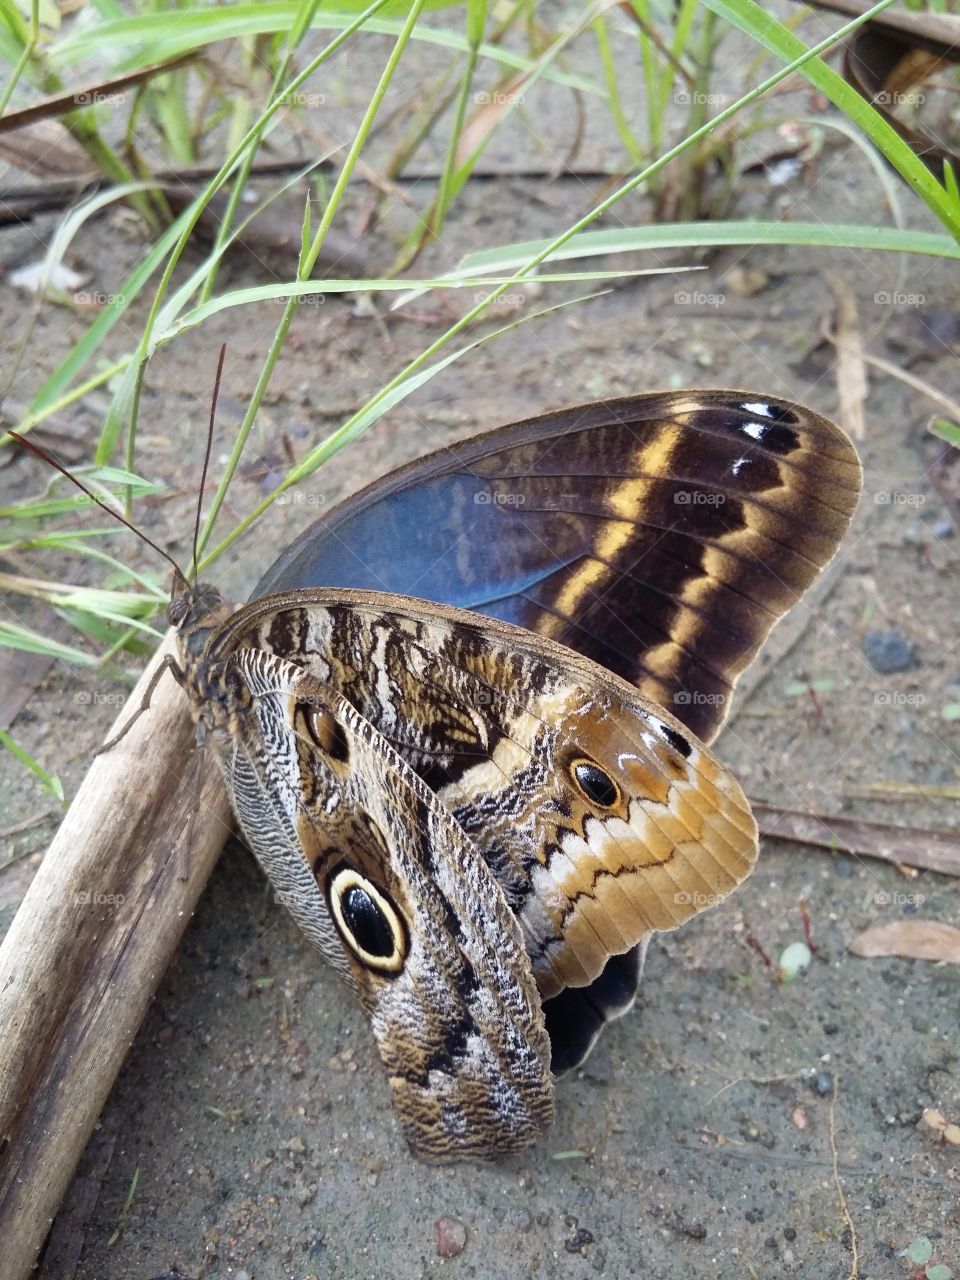 Beautiful butterfly that I found on the way.